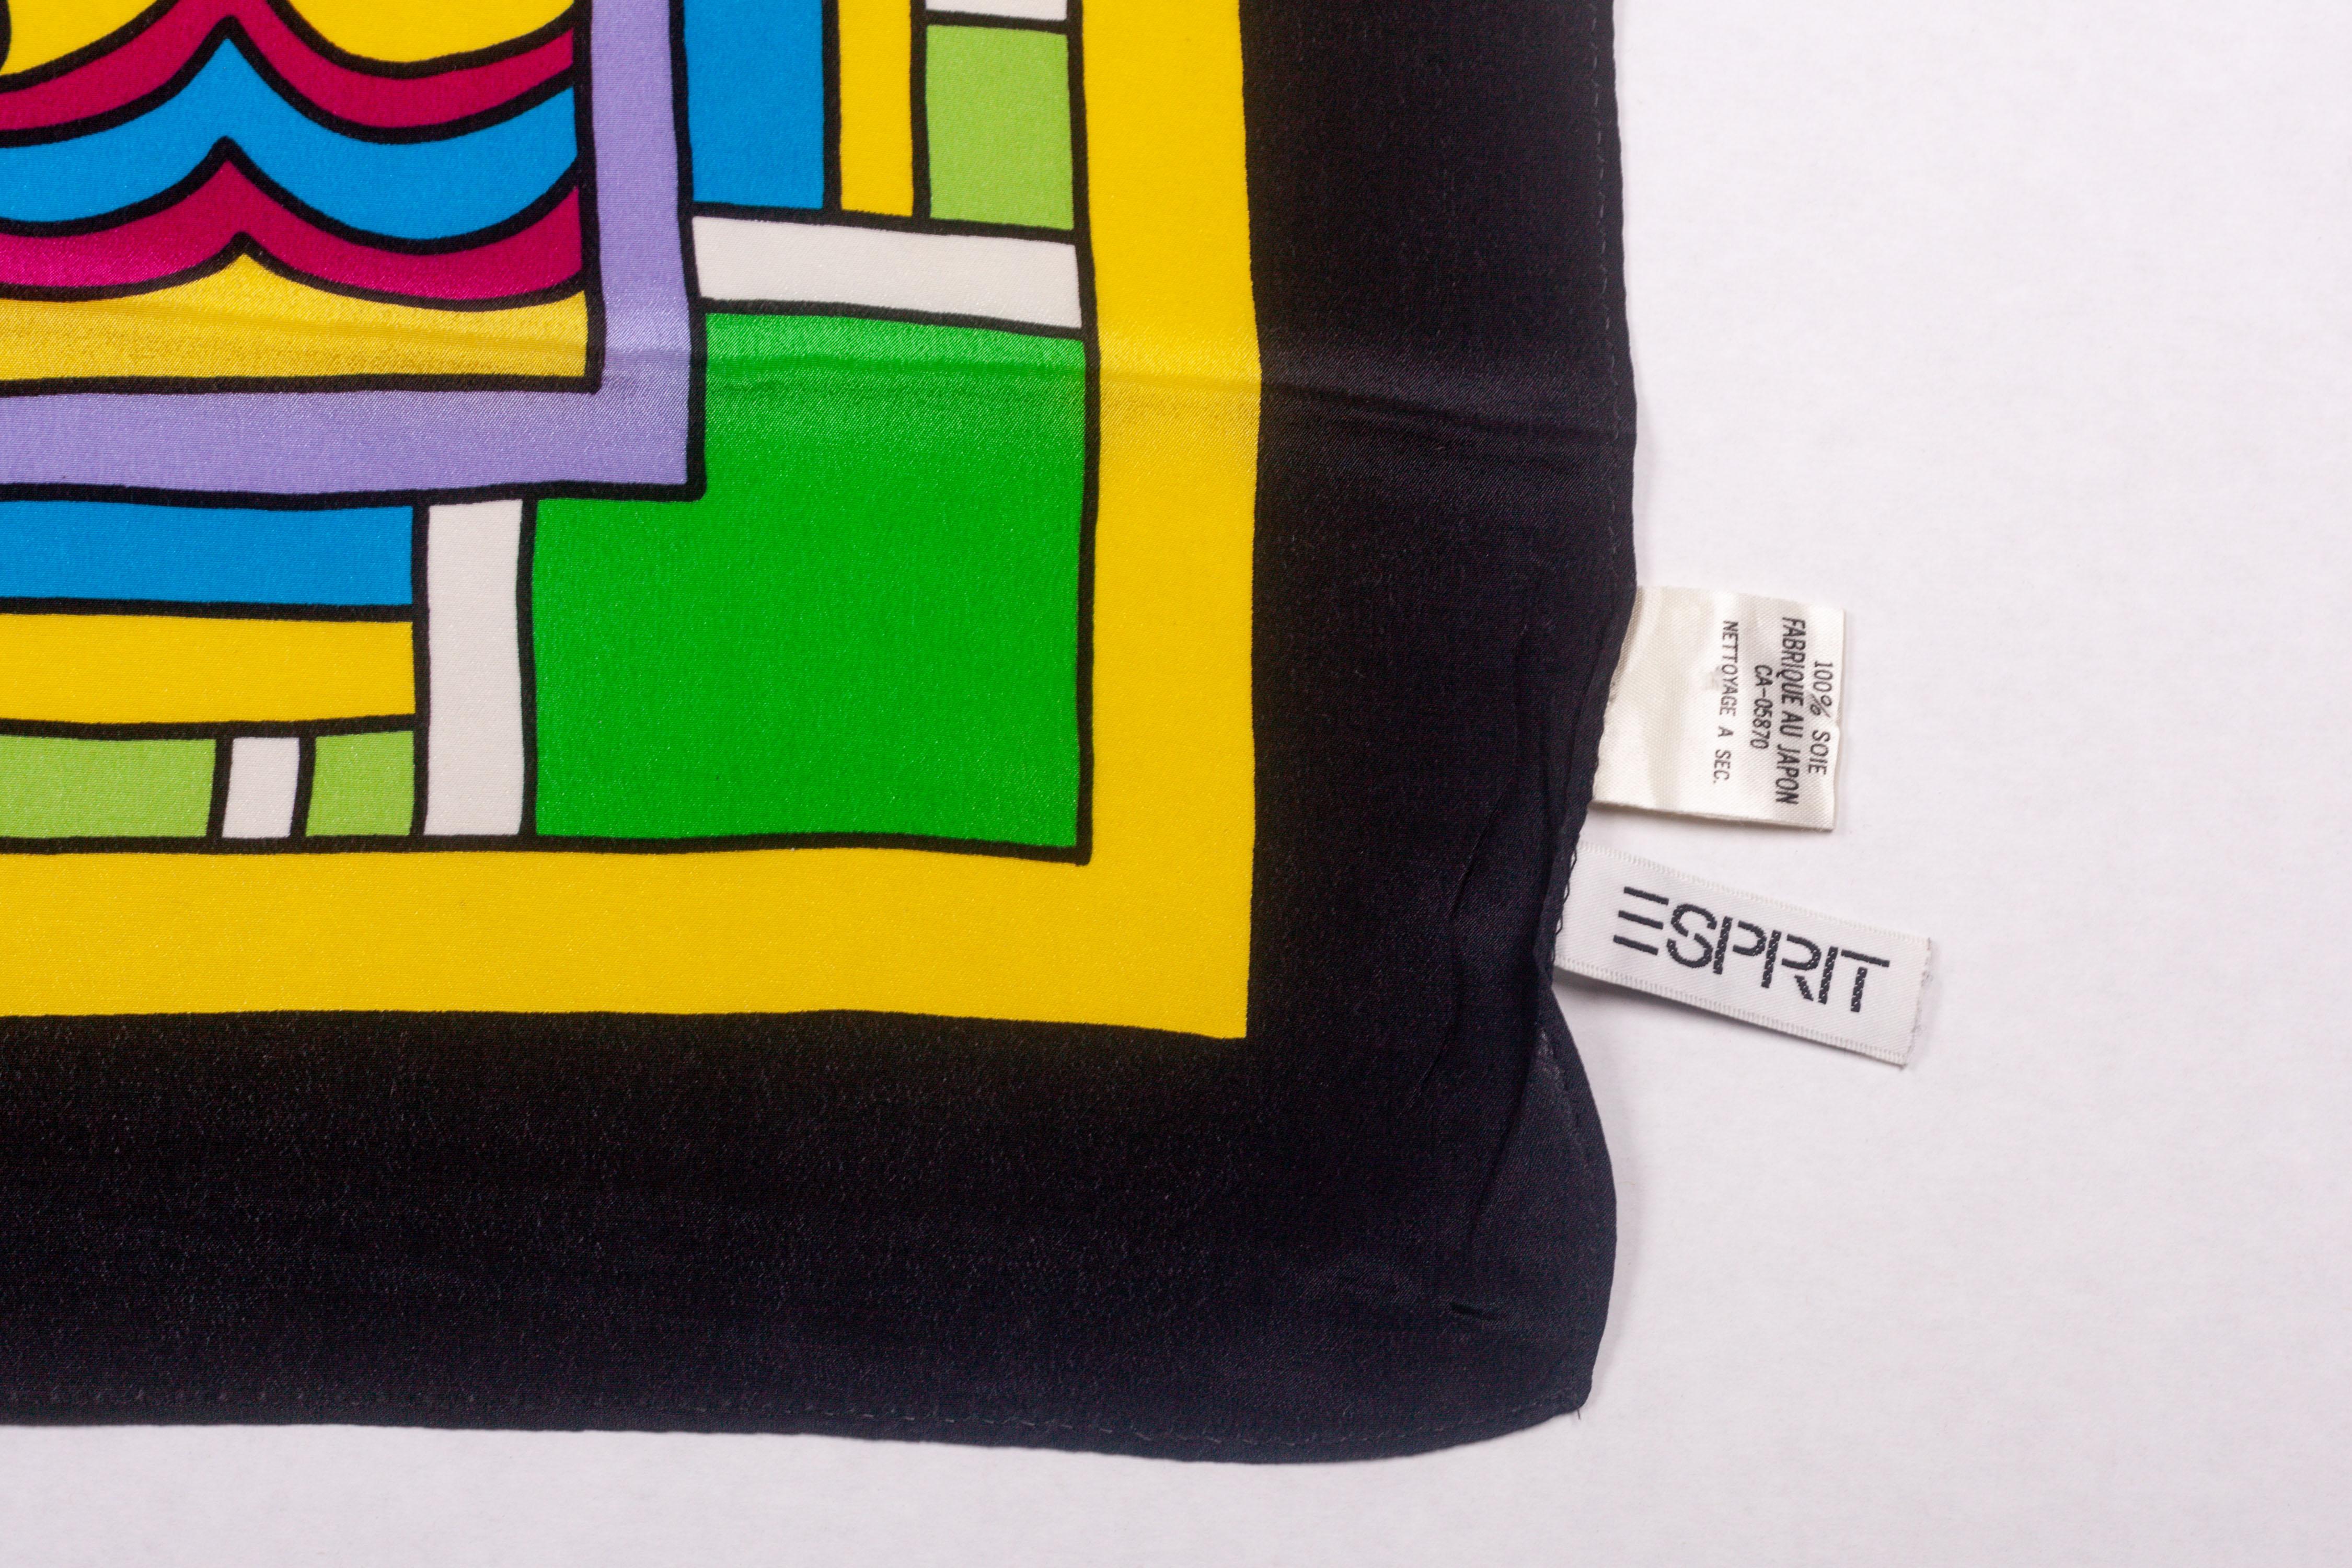 Memphis silk scarf by Nathalie du Pasquier for Esprit in the 1990s. Four electric blue tulips arise from the taupe center towards the corners of a bright yellow square background, bordered by a blue and a green design. Some bird like silhouettes in